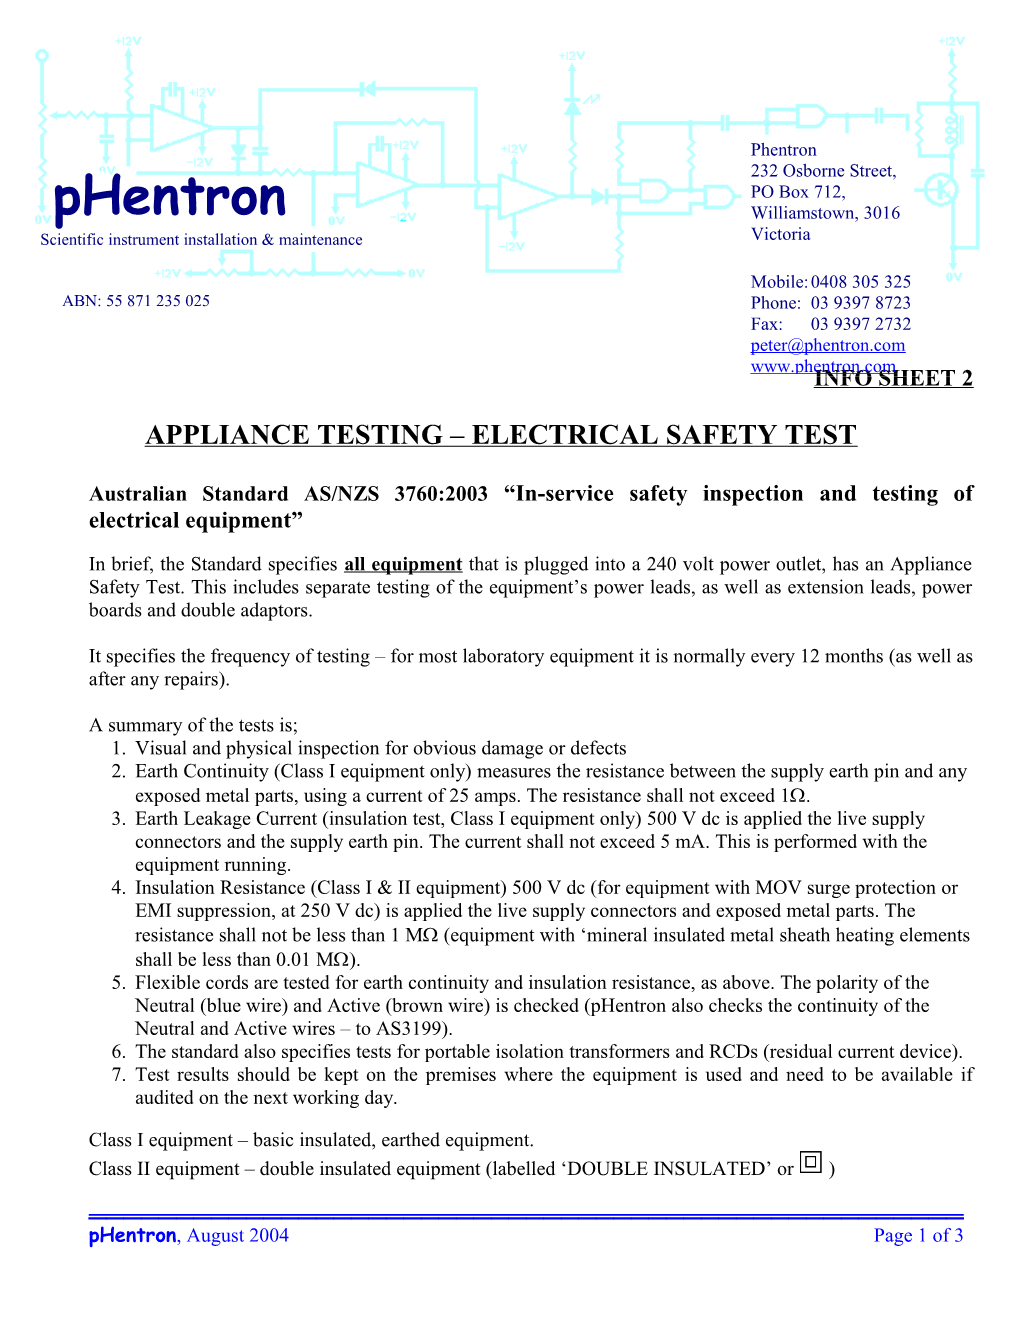 Appliance Testing Electrical Safety Test